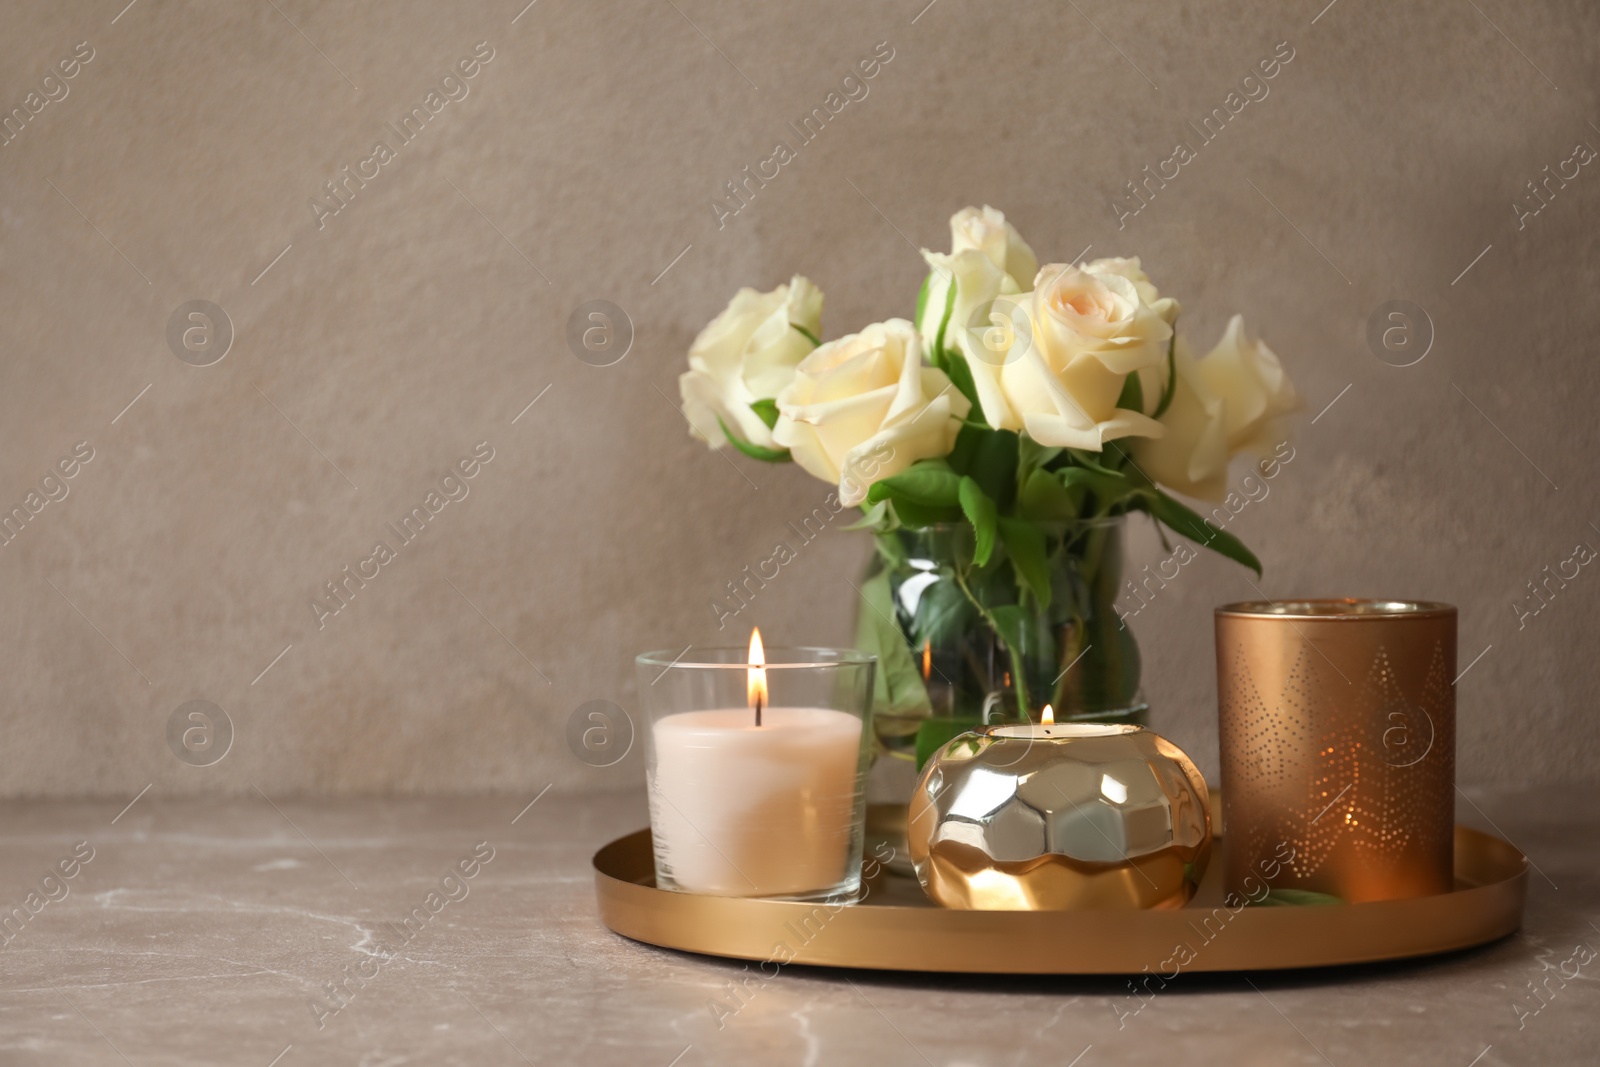 Photo of Tray with burning wax candles and flowers on table